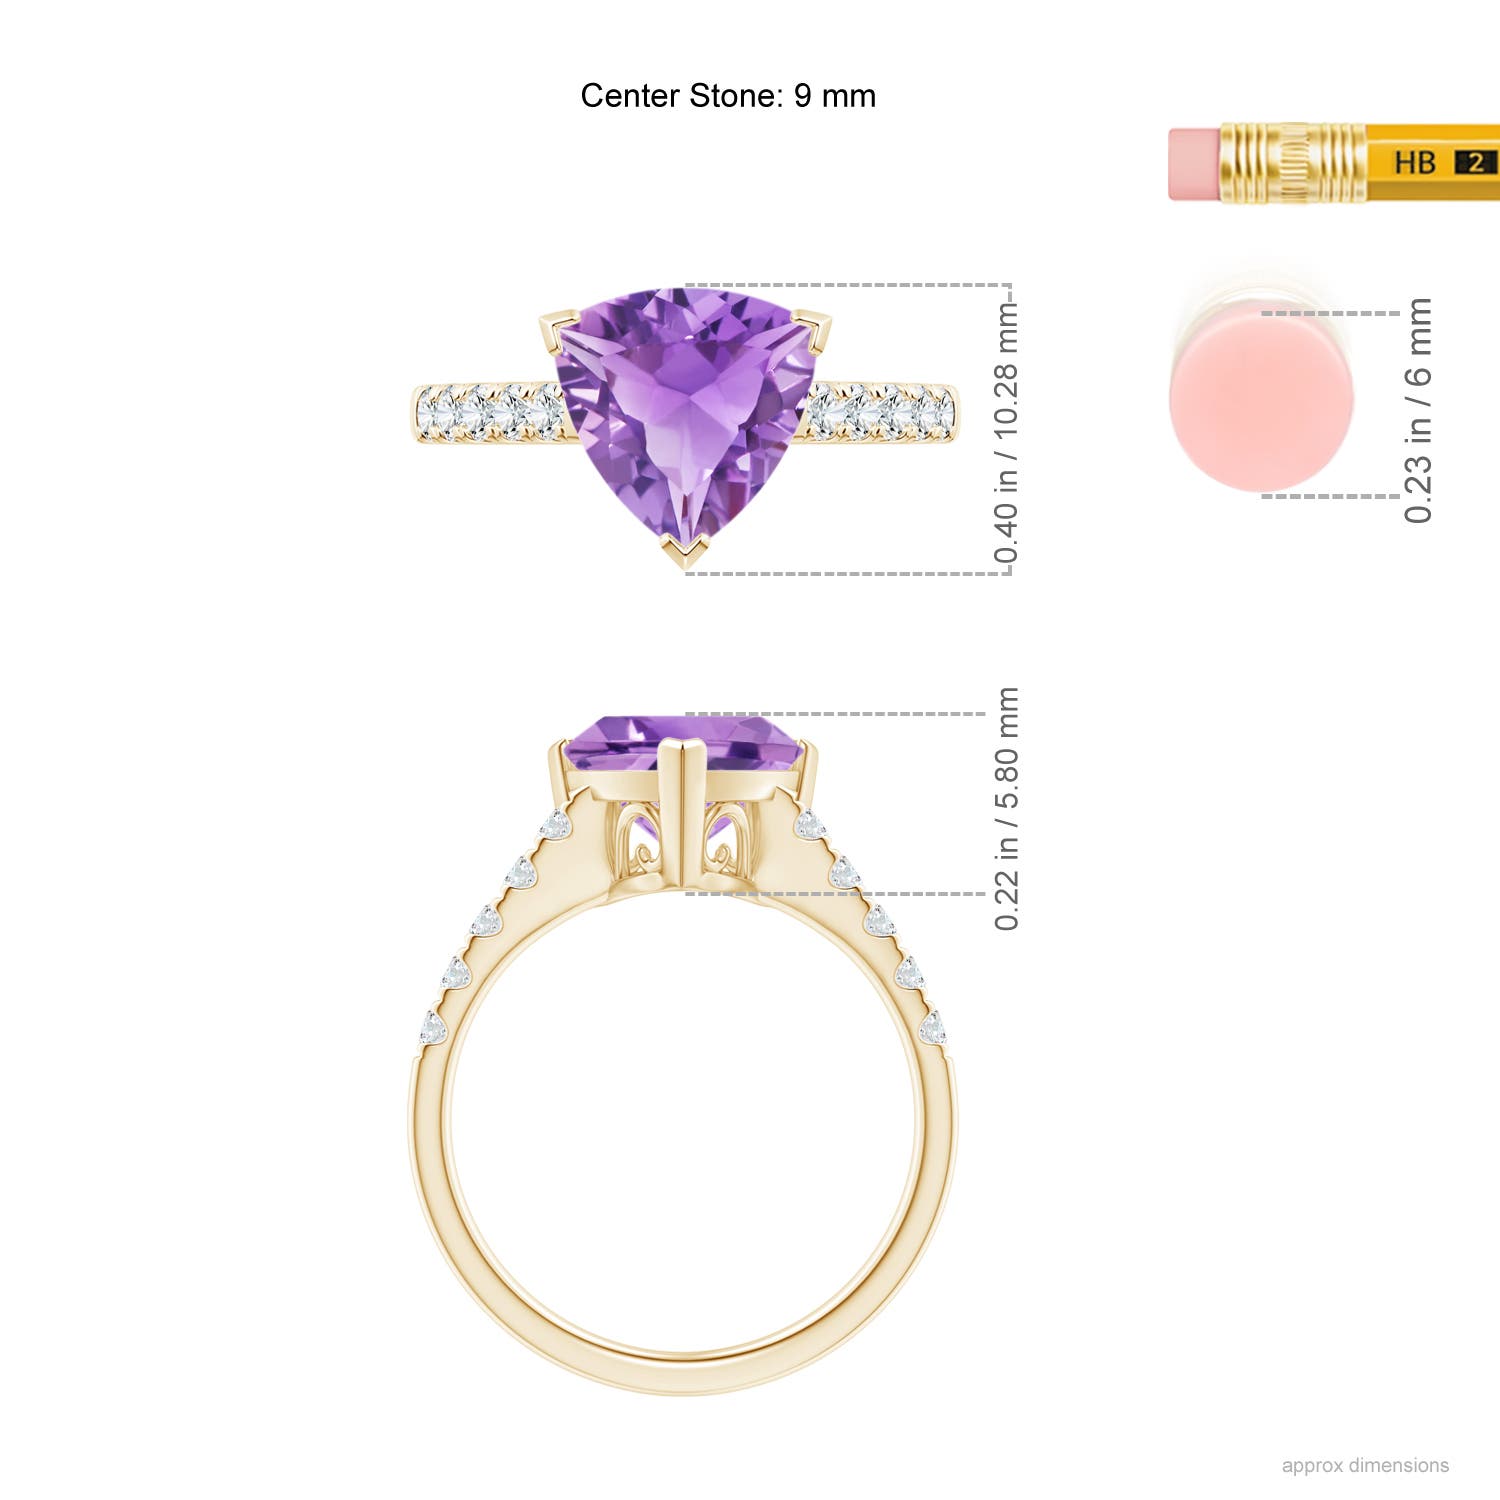 A - Amethyst / 2.53 CT / 14 KT Yellow Gold